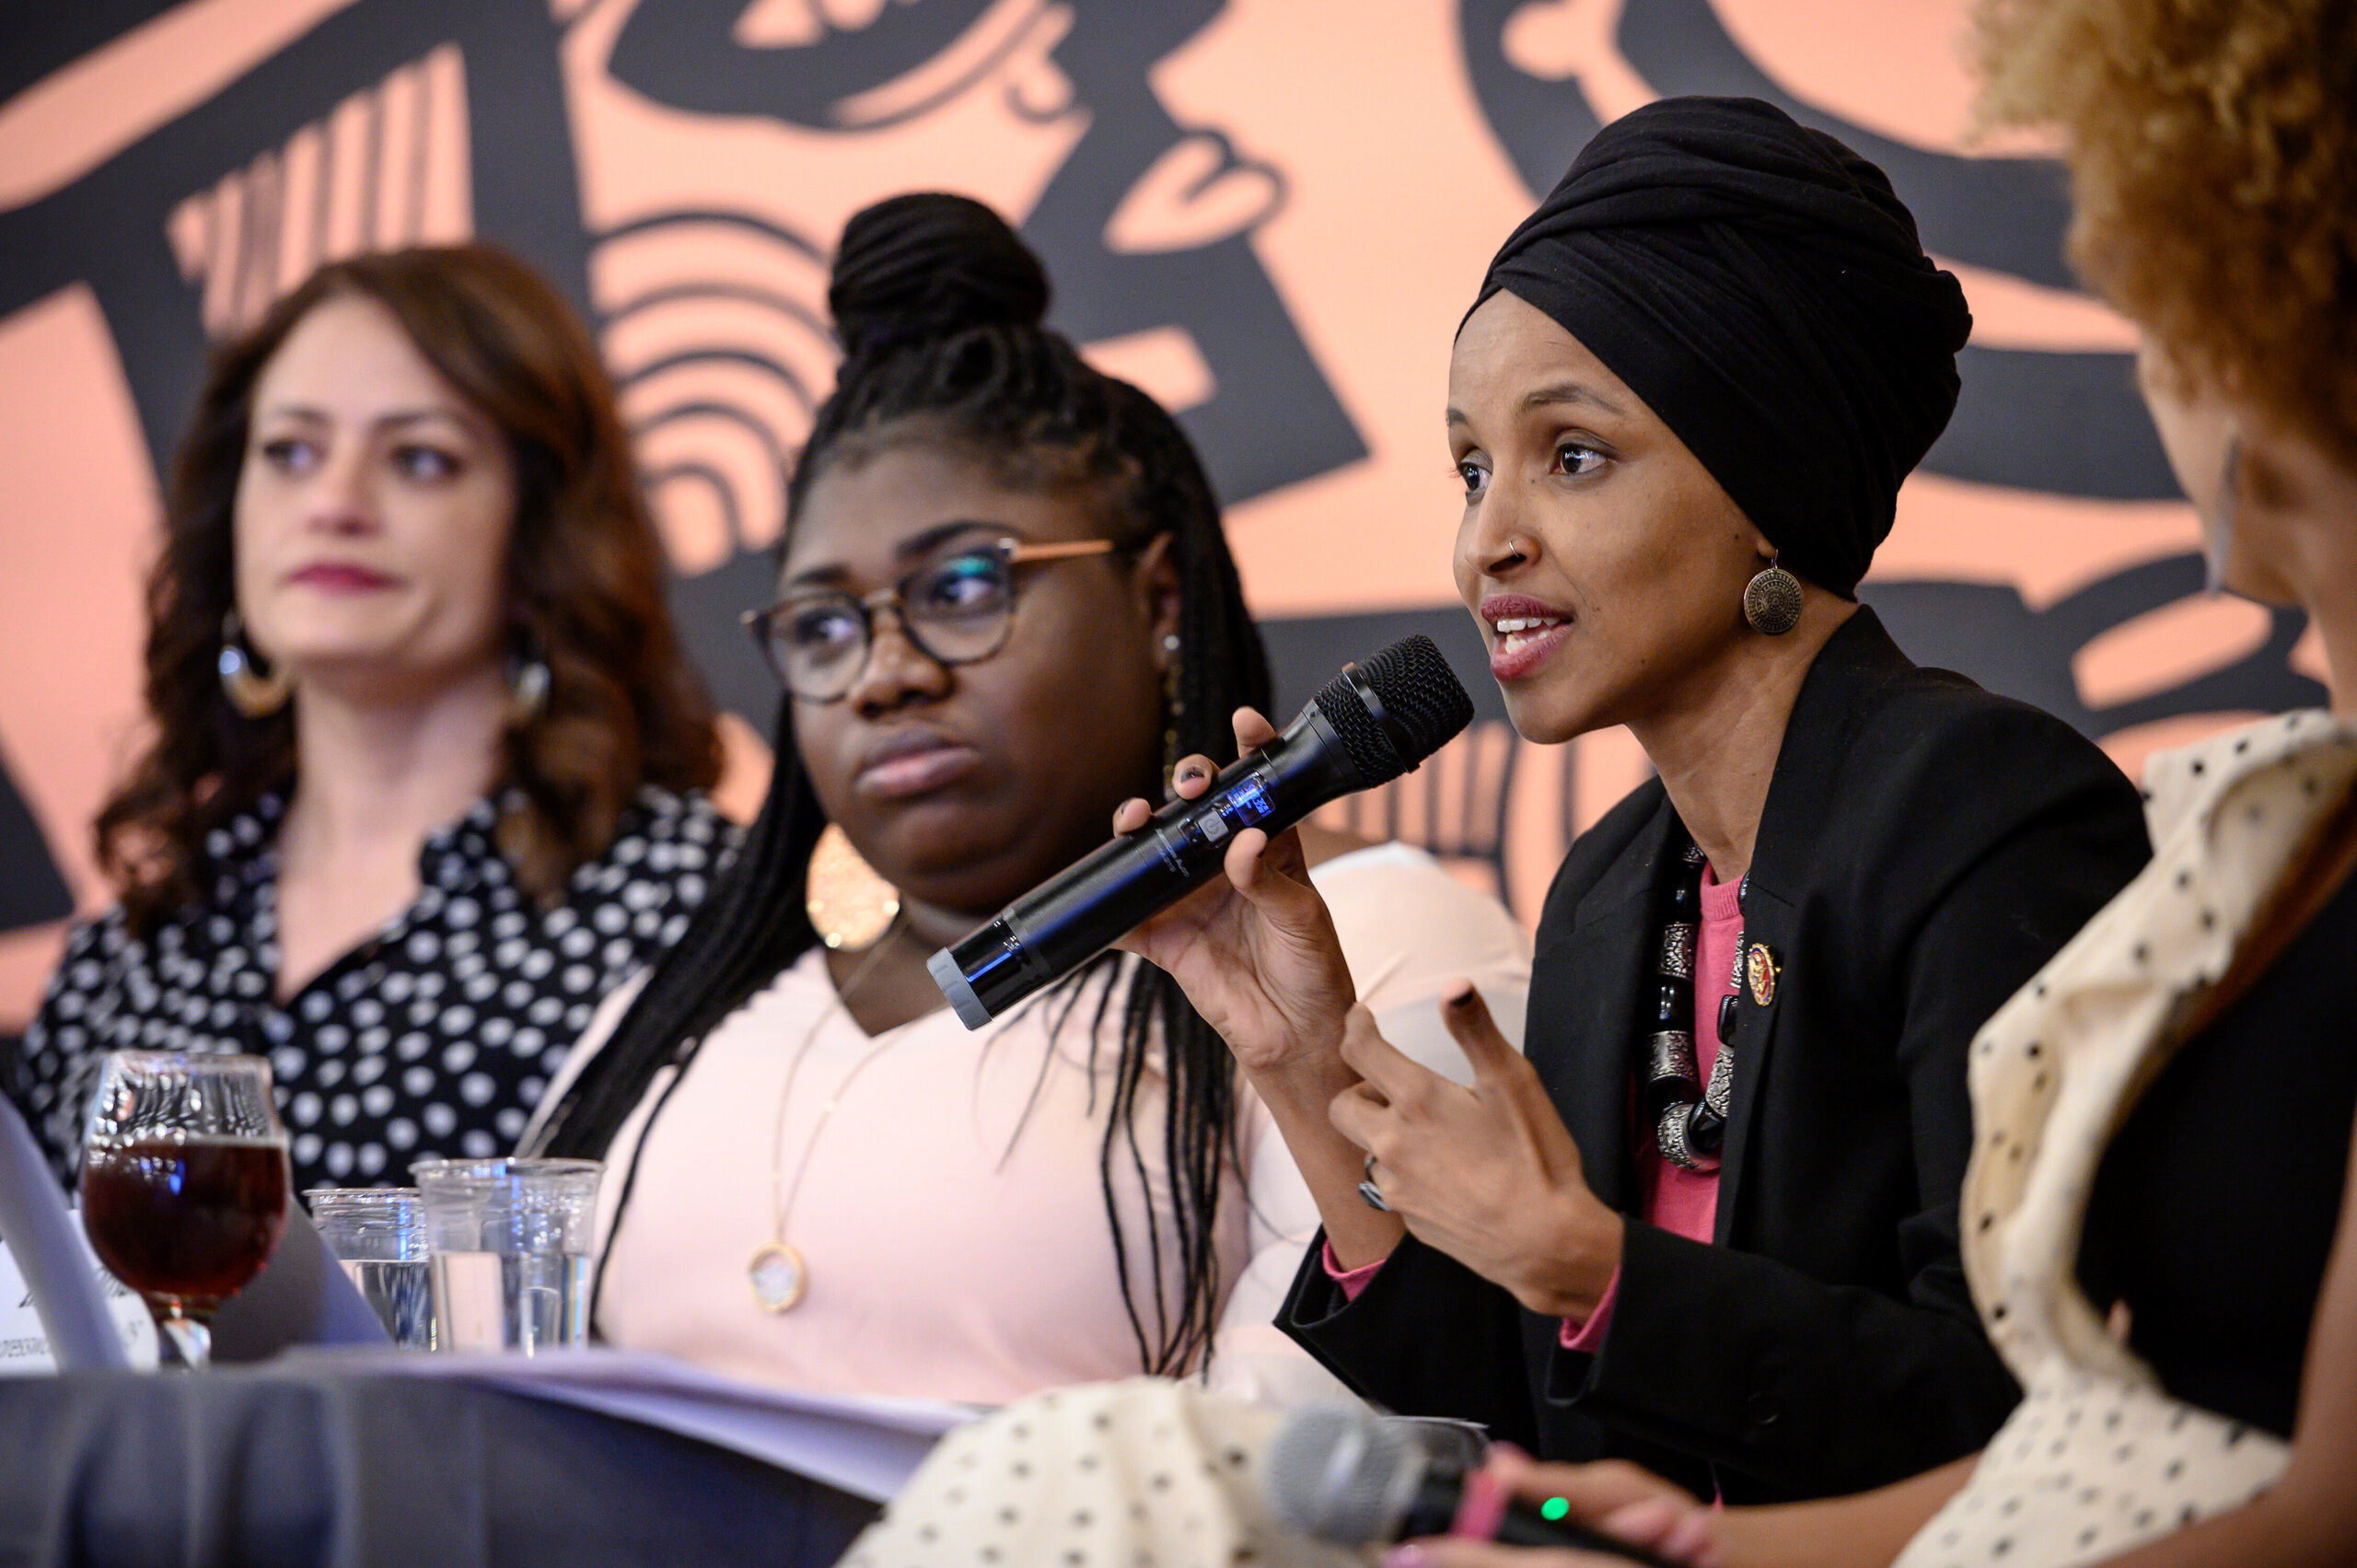 Omar speaks on a panel during the Paycheck Fairness and Women's Workforce Development Town Hall in Minneapolis on April 24, 2